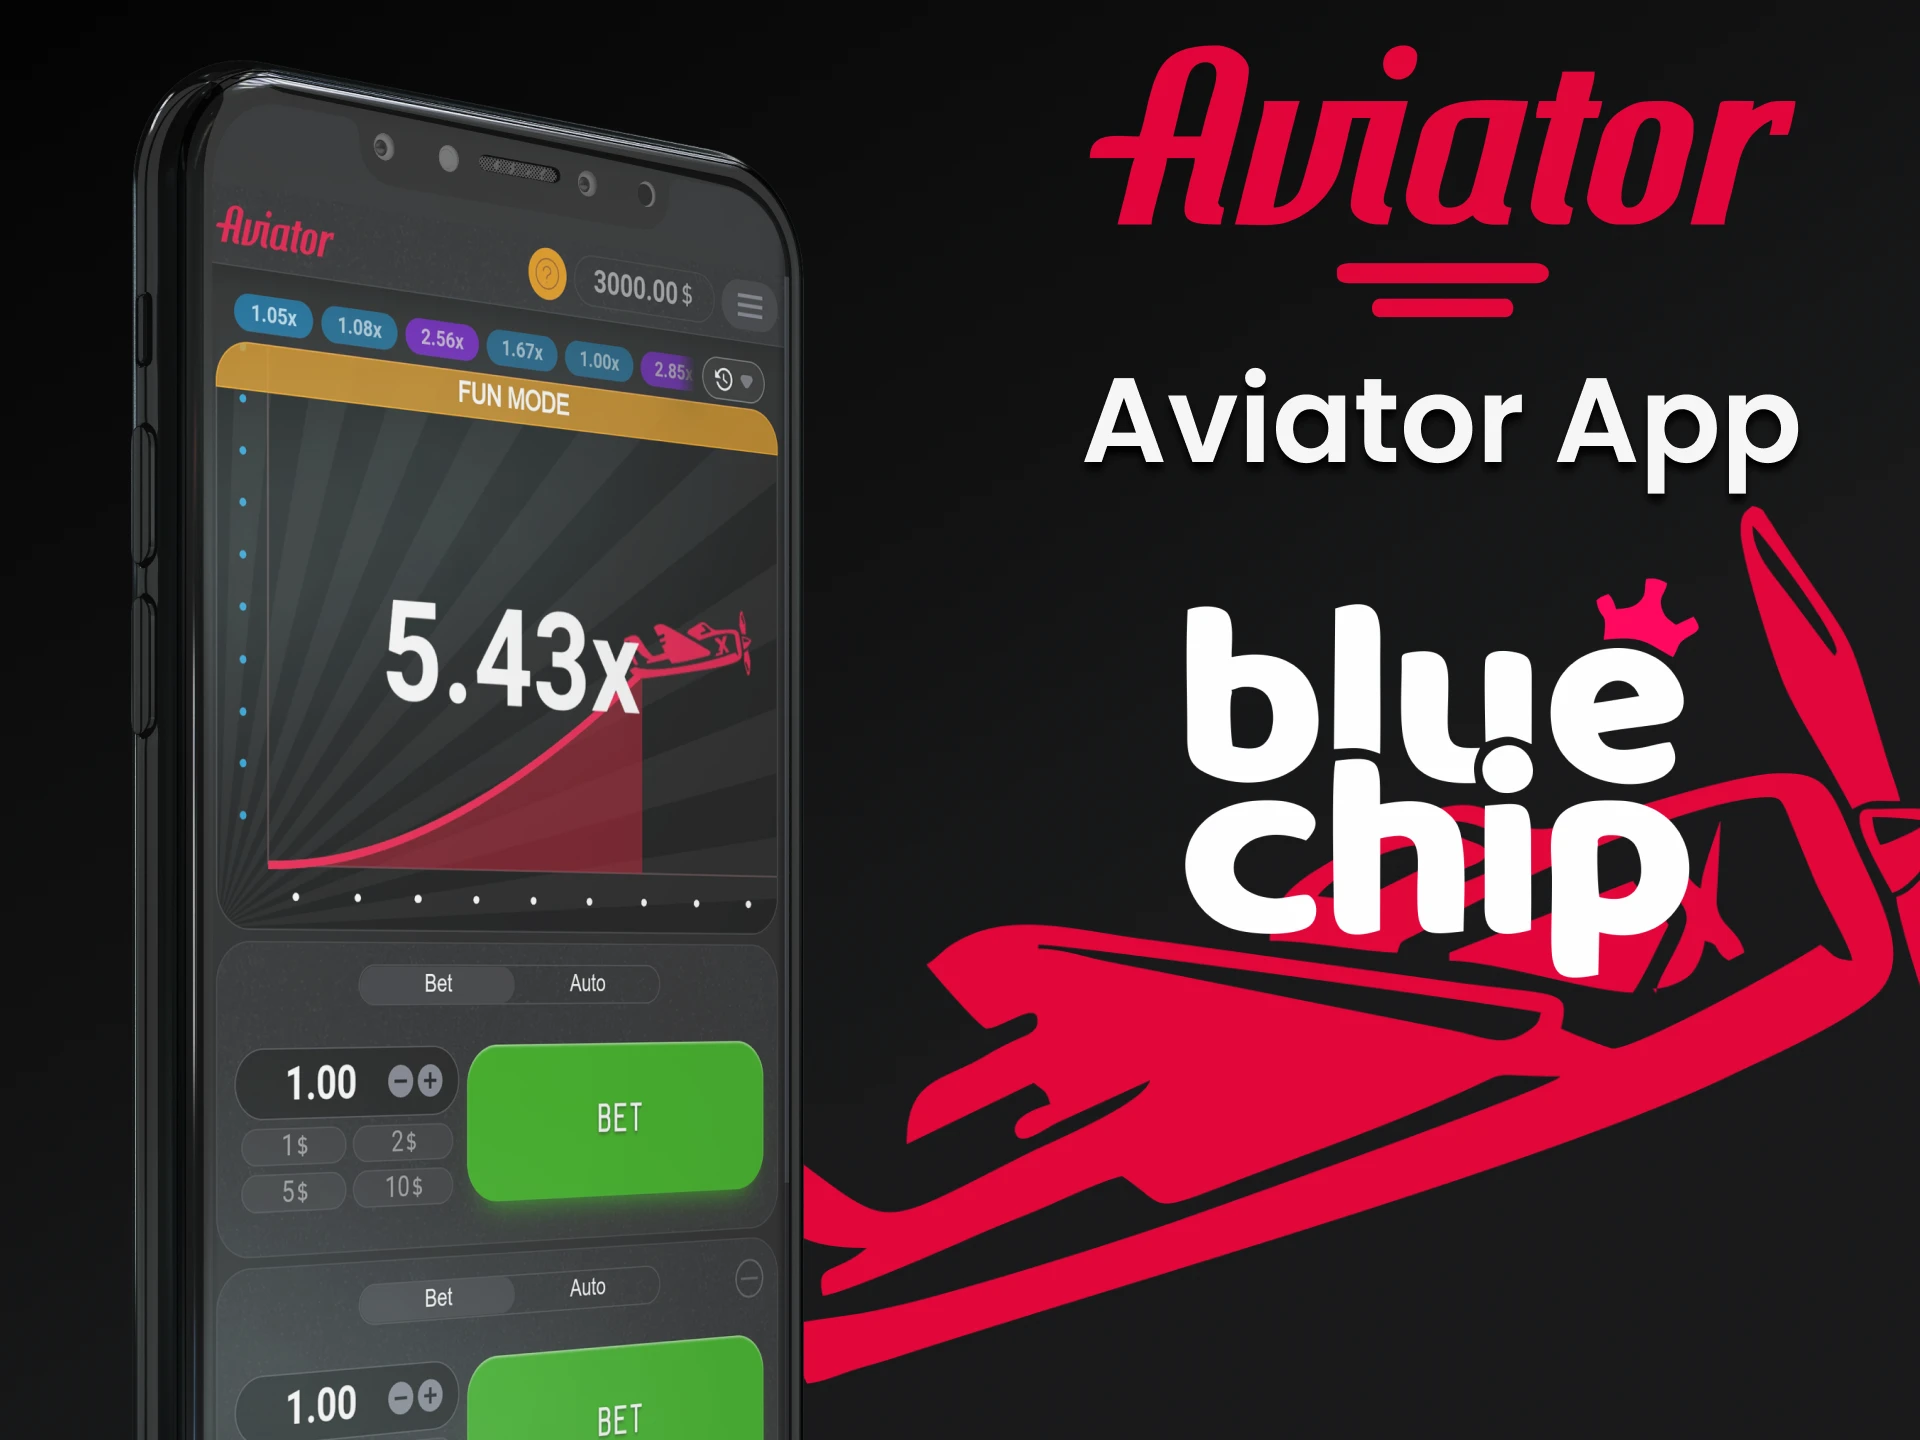 Play the Aviator game with the BlueChip app.